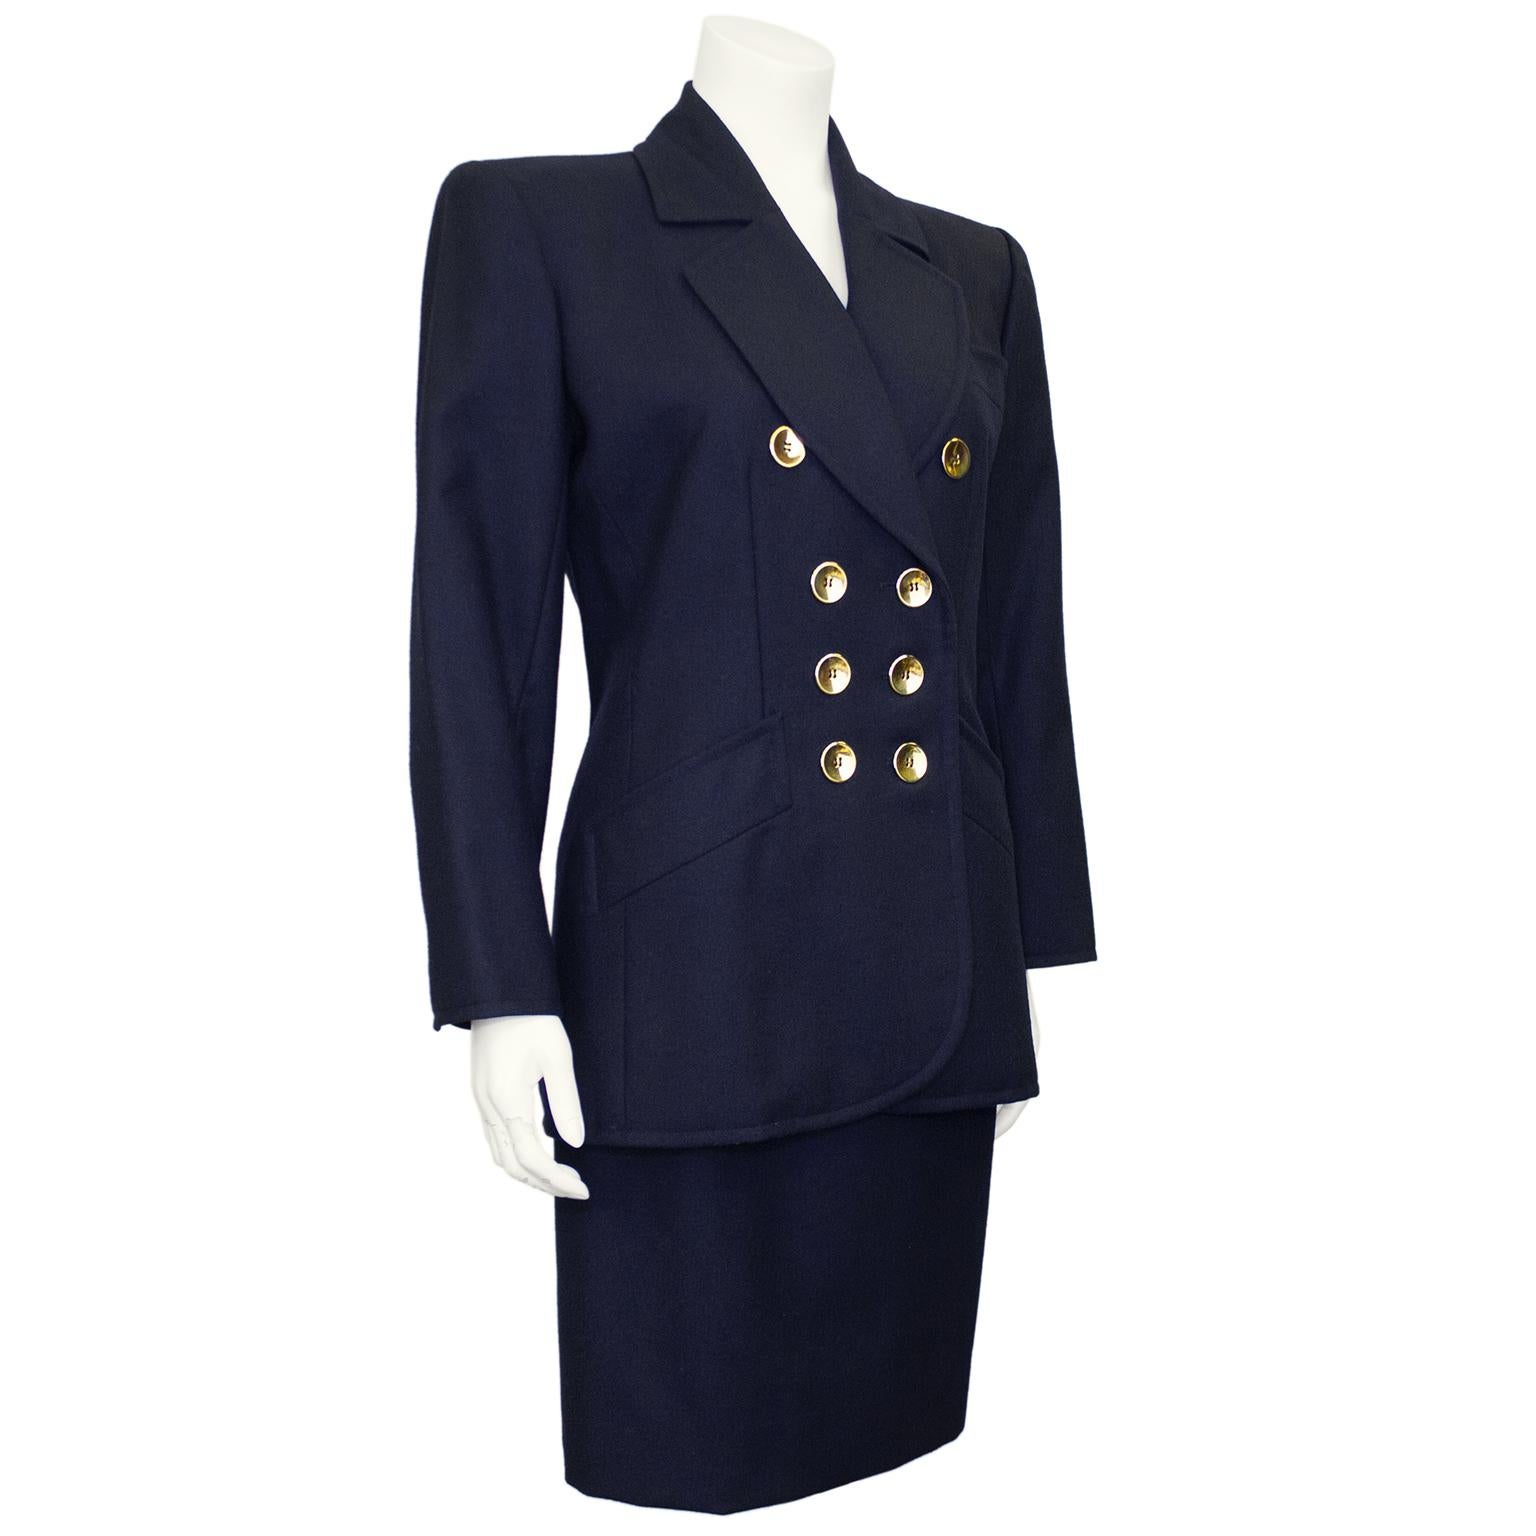 1990s Yves Saint Laurent Rive Gauche skirt suit in a dark navy wool. A classic style power suit; the jacket features shoulder pads and double breasted gold buttons down the front as well as on the cuffs with slit pockets on the hips. The notched